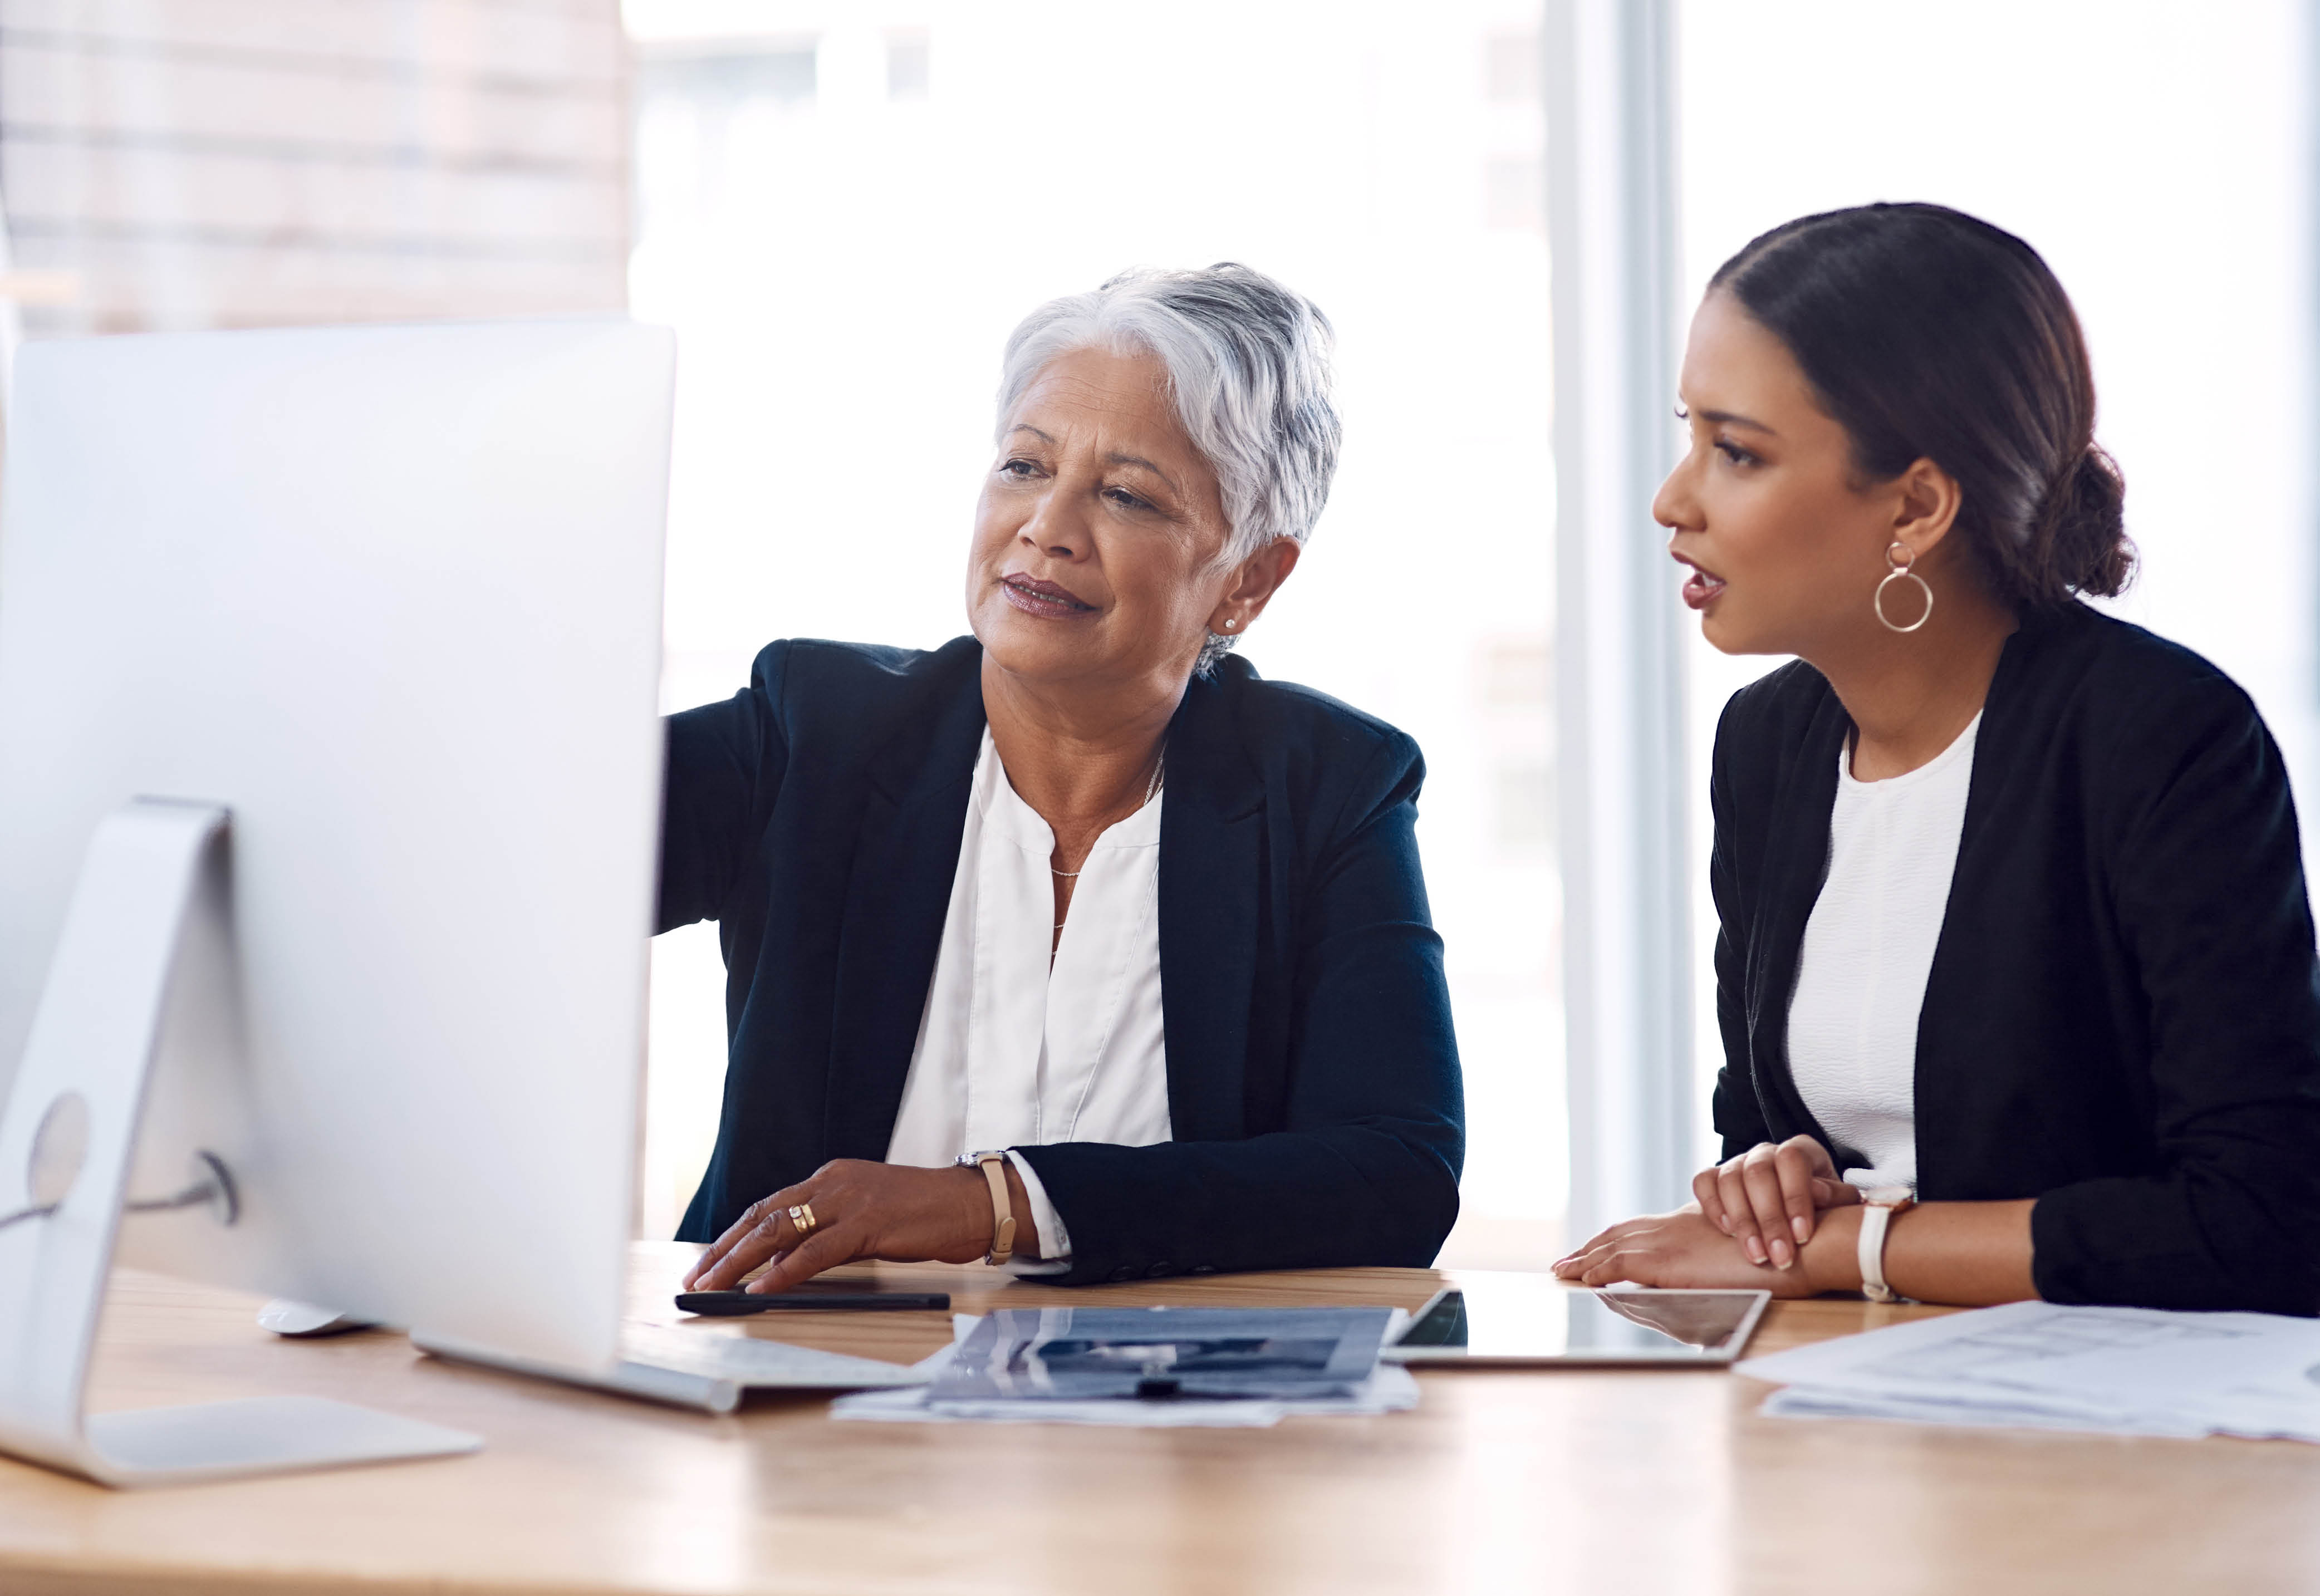 Two women dressed in business attire looking at a computer